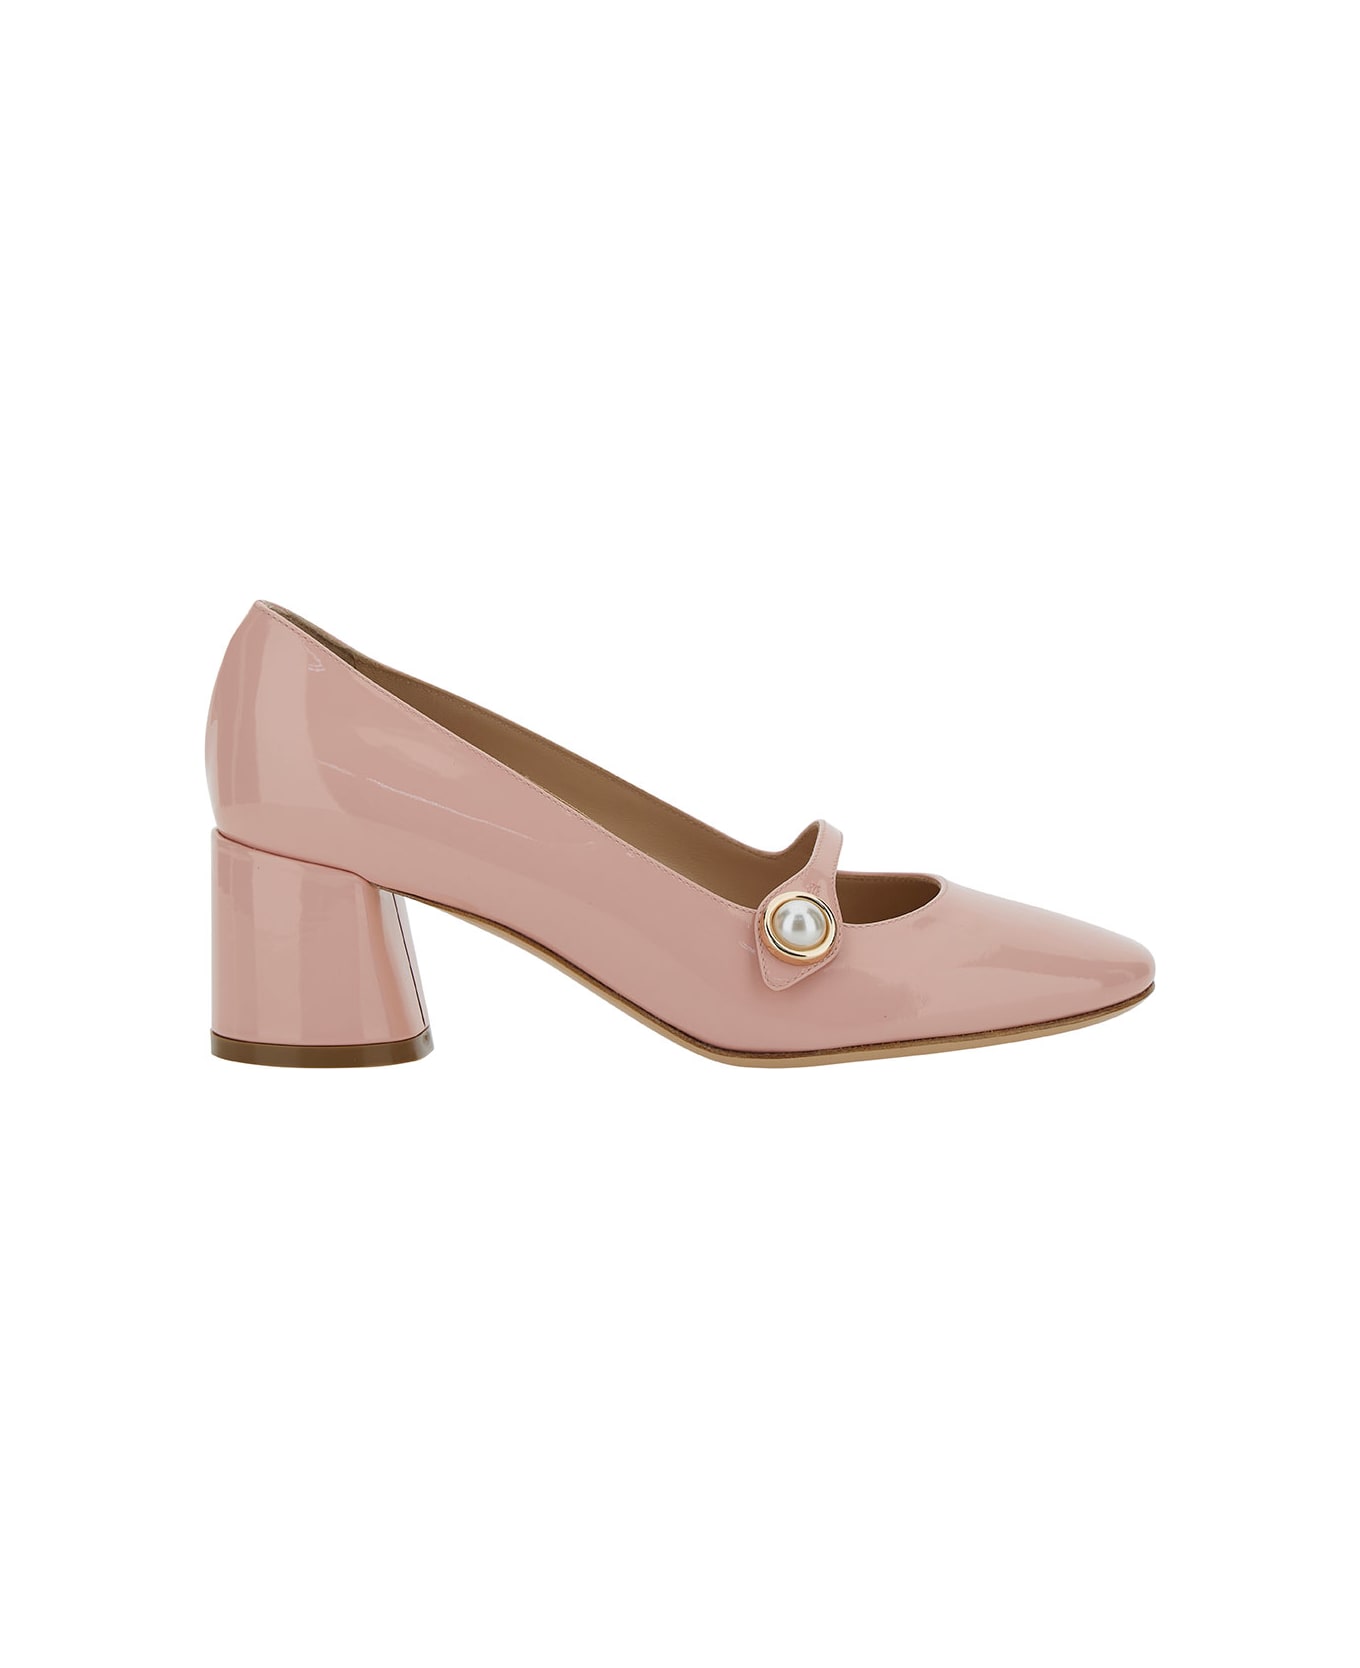 Casadei 'emily' Pink Pointed Pumps With Pearl Detail In Patent Leather Woman - Pink ハイヒール